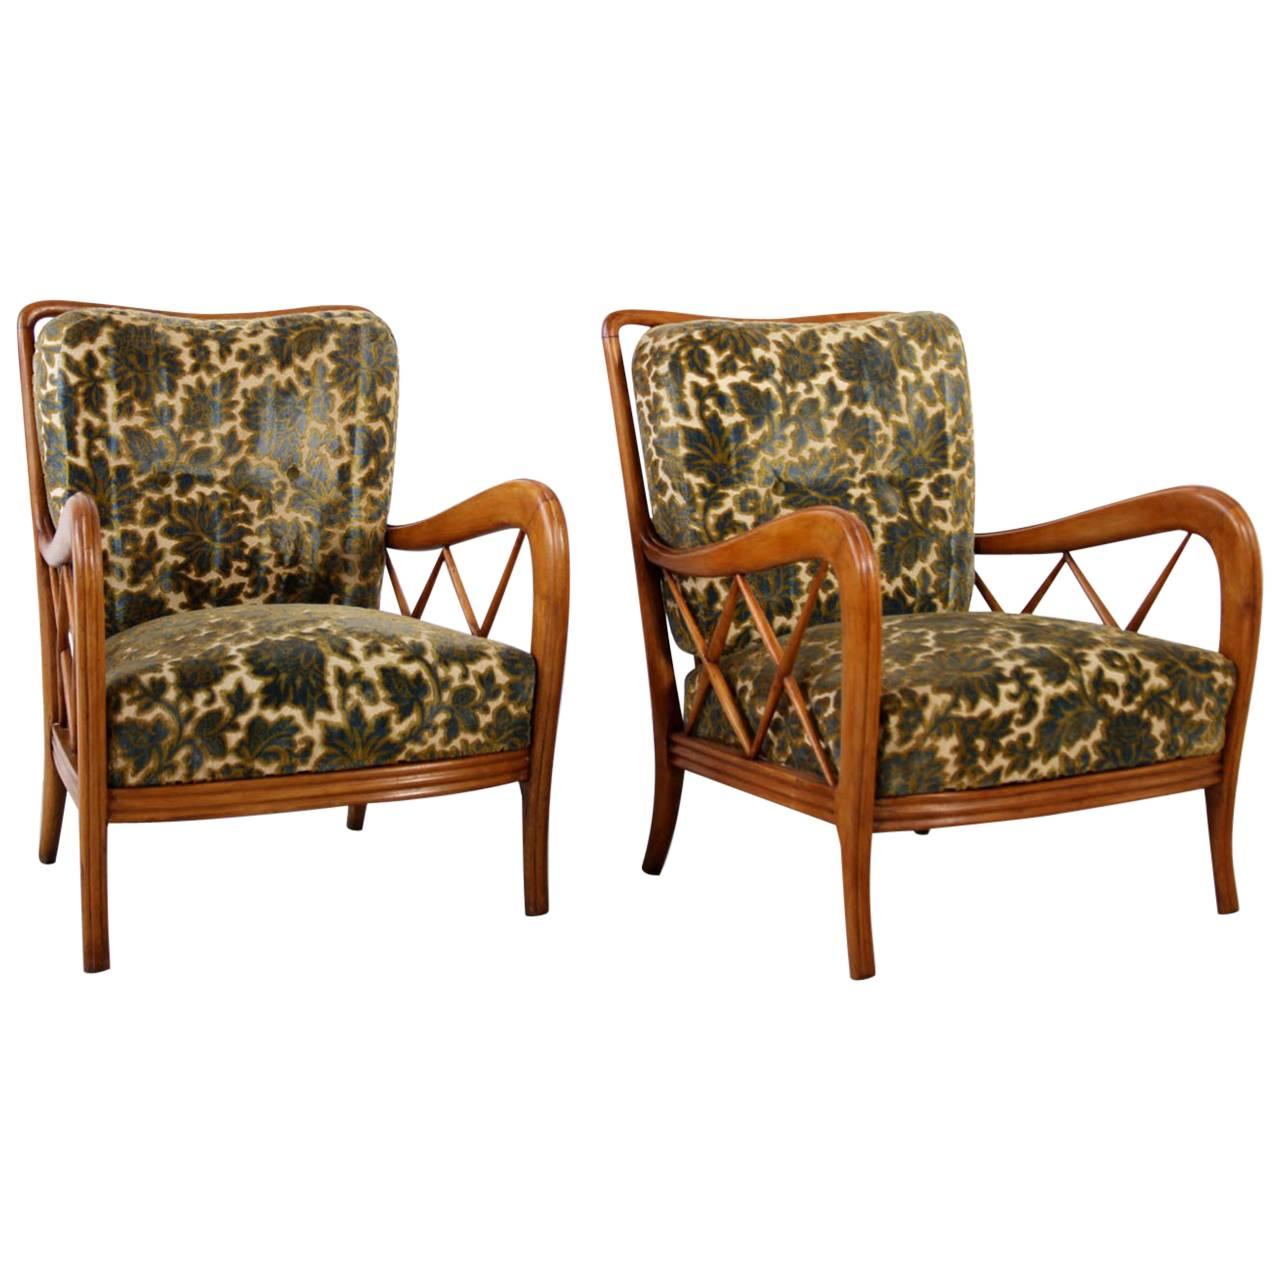 Paolo Buffa Italian Pair of Wooden Armchairs with floral patterned Fabric, 1940s